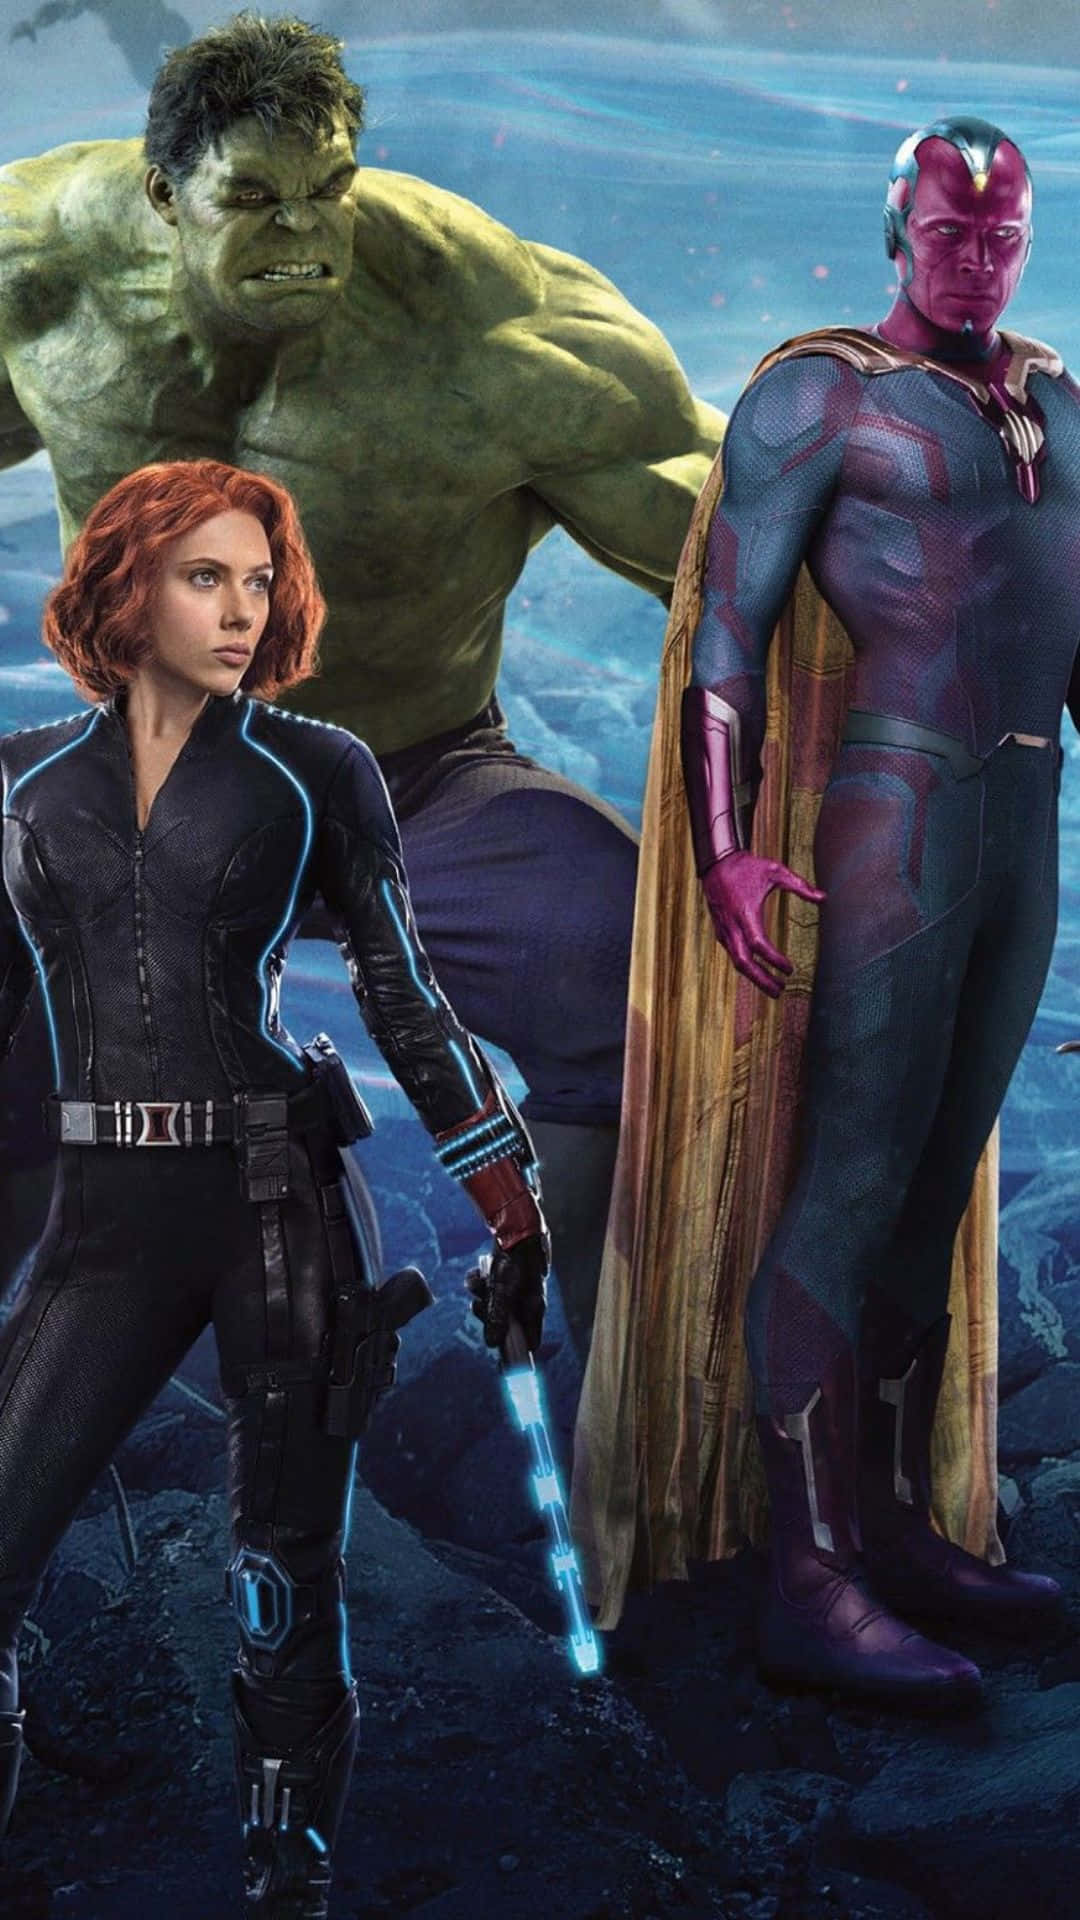 Android Marvel's Avengers Hulk, Black Widow, And Vision Background